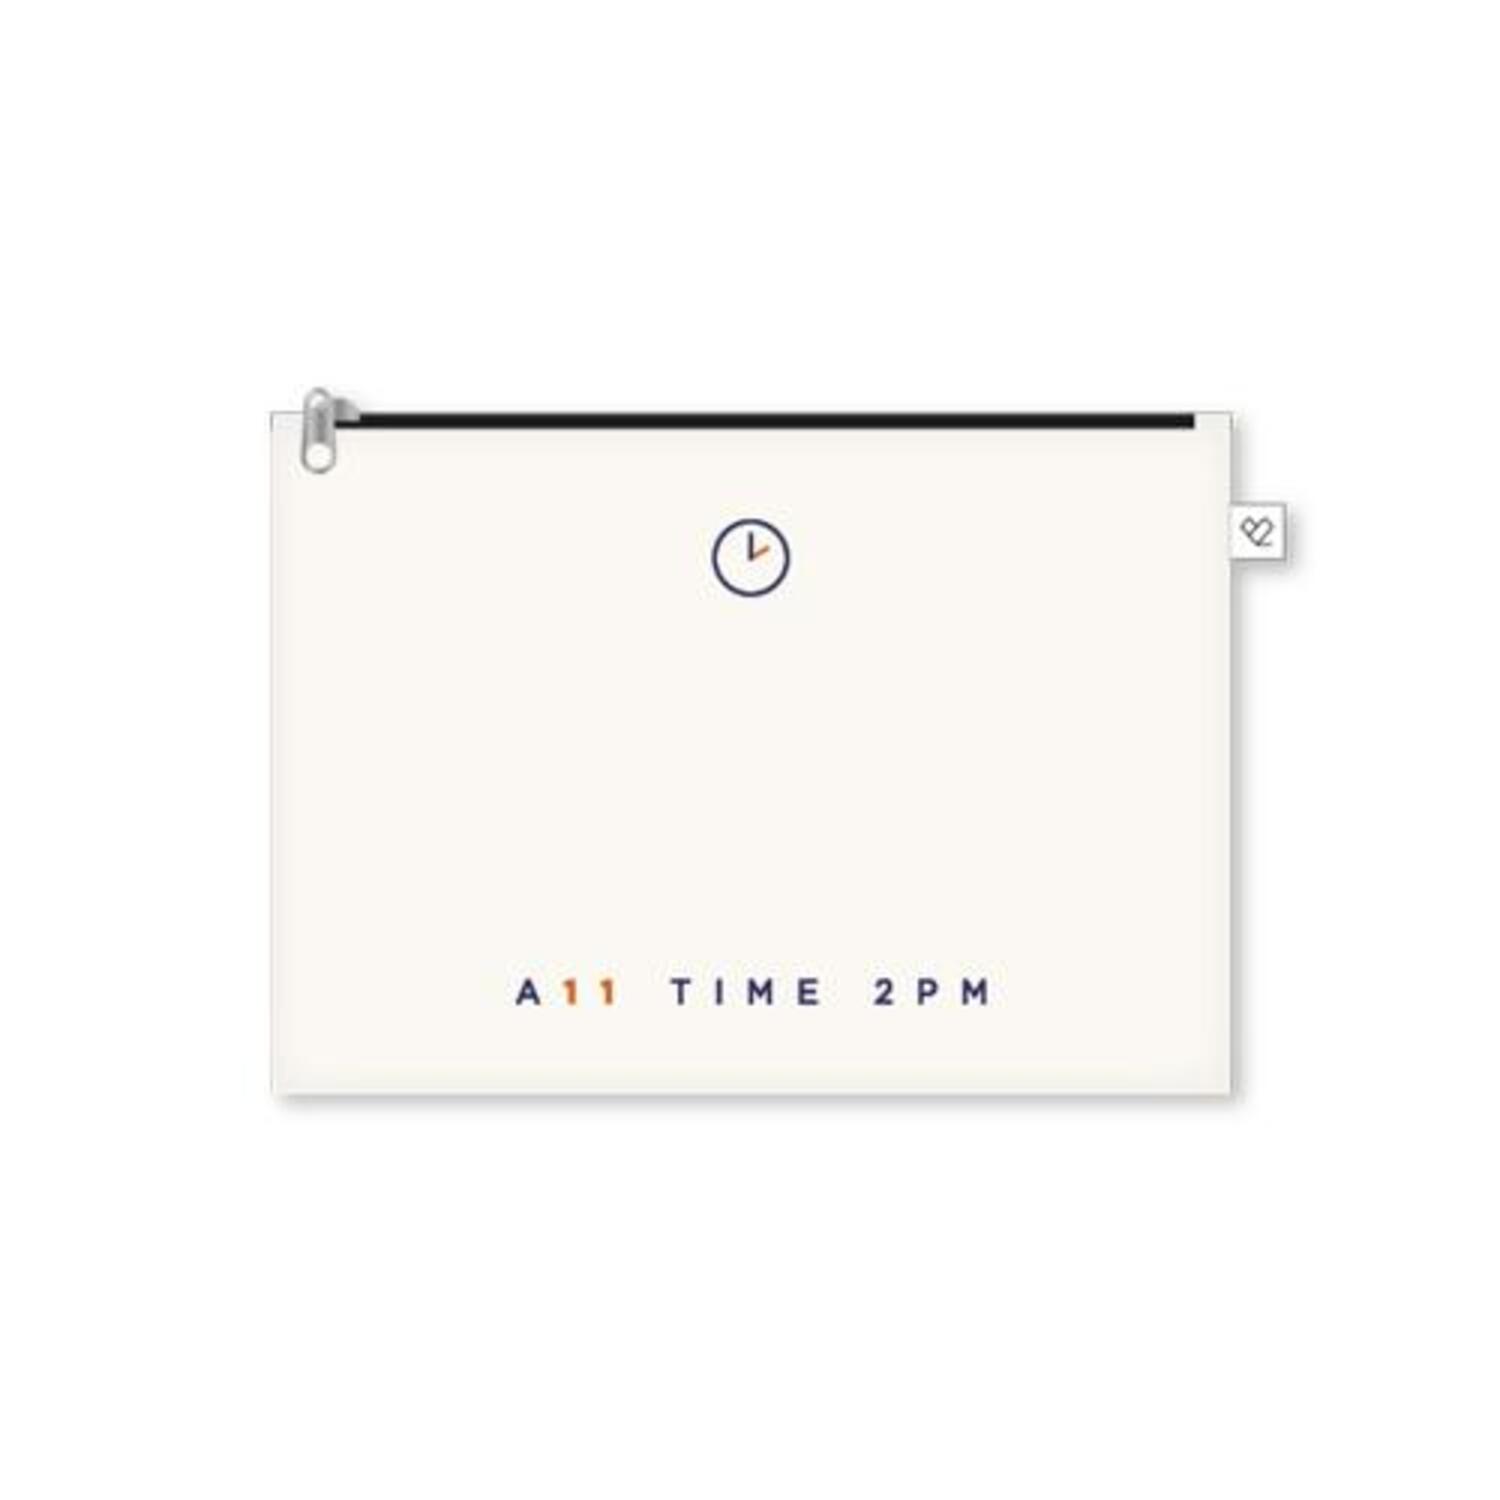 2PM - A11 TIME 2PM OFFICIAL MD / 파우치(POUCH)